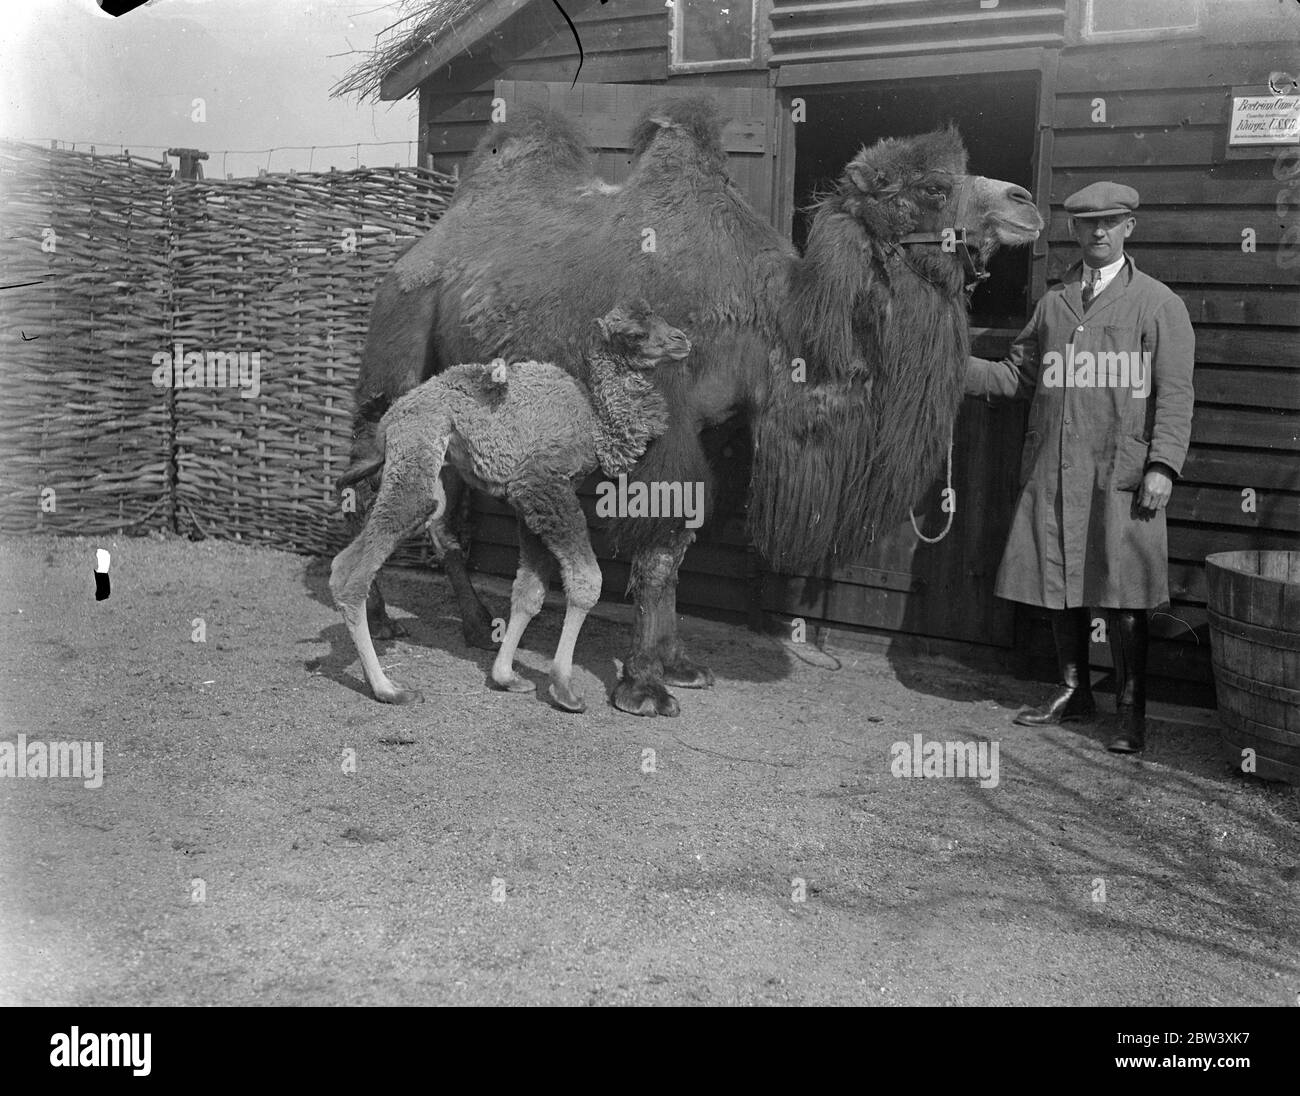 Whipsnade Zoo is rejoicing in the birth of its first baby camel, Hallelujah. The baby, which has born to Fattama, has two humps. The parents were brought from the Morocco Zoo last September. Photo shows: Hallelujah with its mother, Fattama at Whipsnade. 31 March 1937 Stock Photo